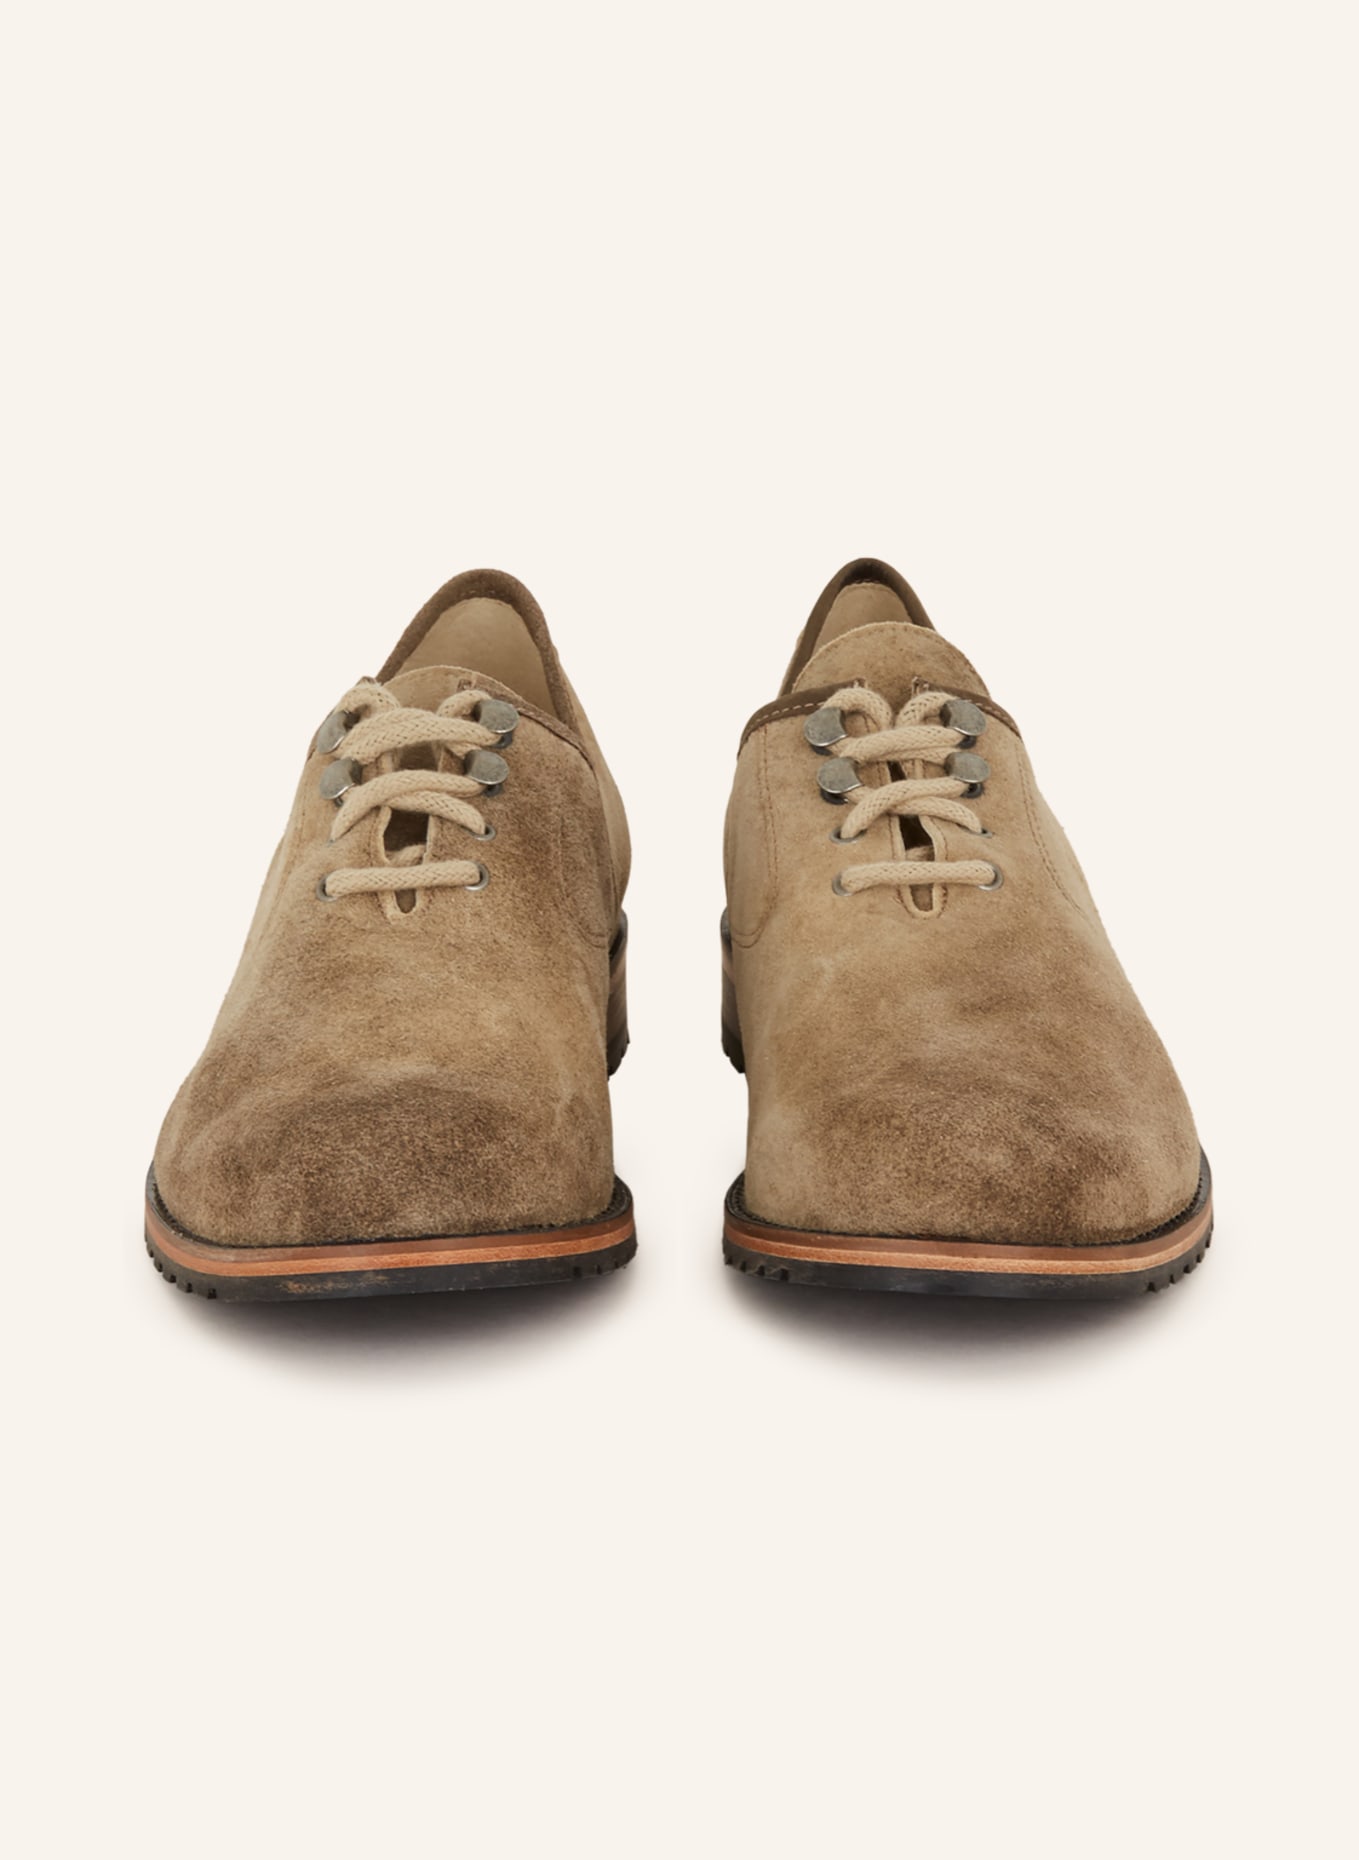 OSTARRICHI Haferl shoes, Color: LIGHT BROWN (Image 3)